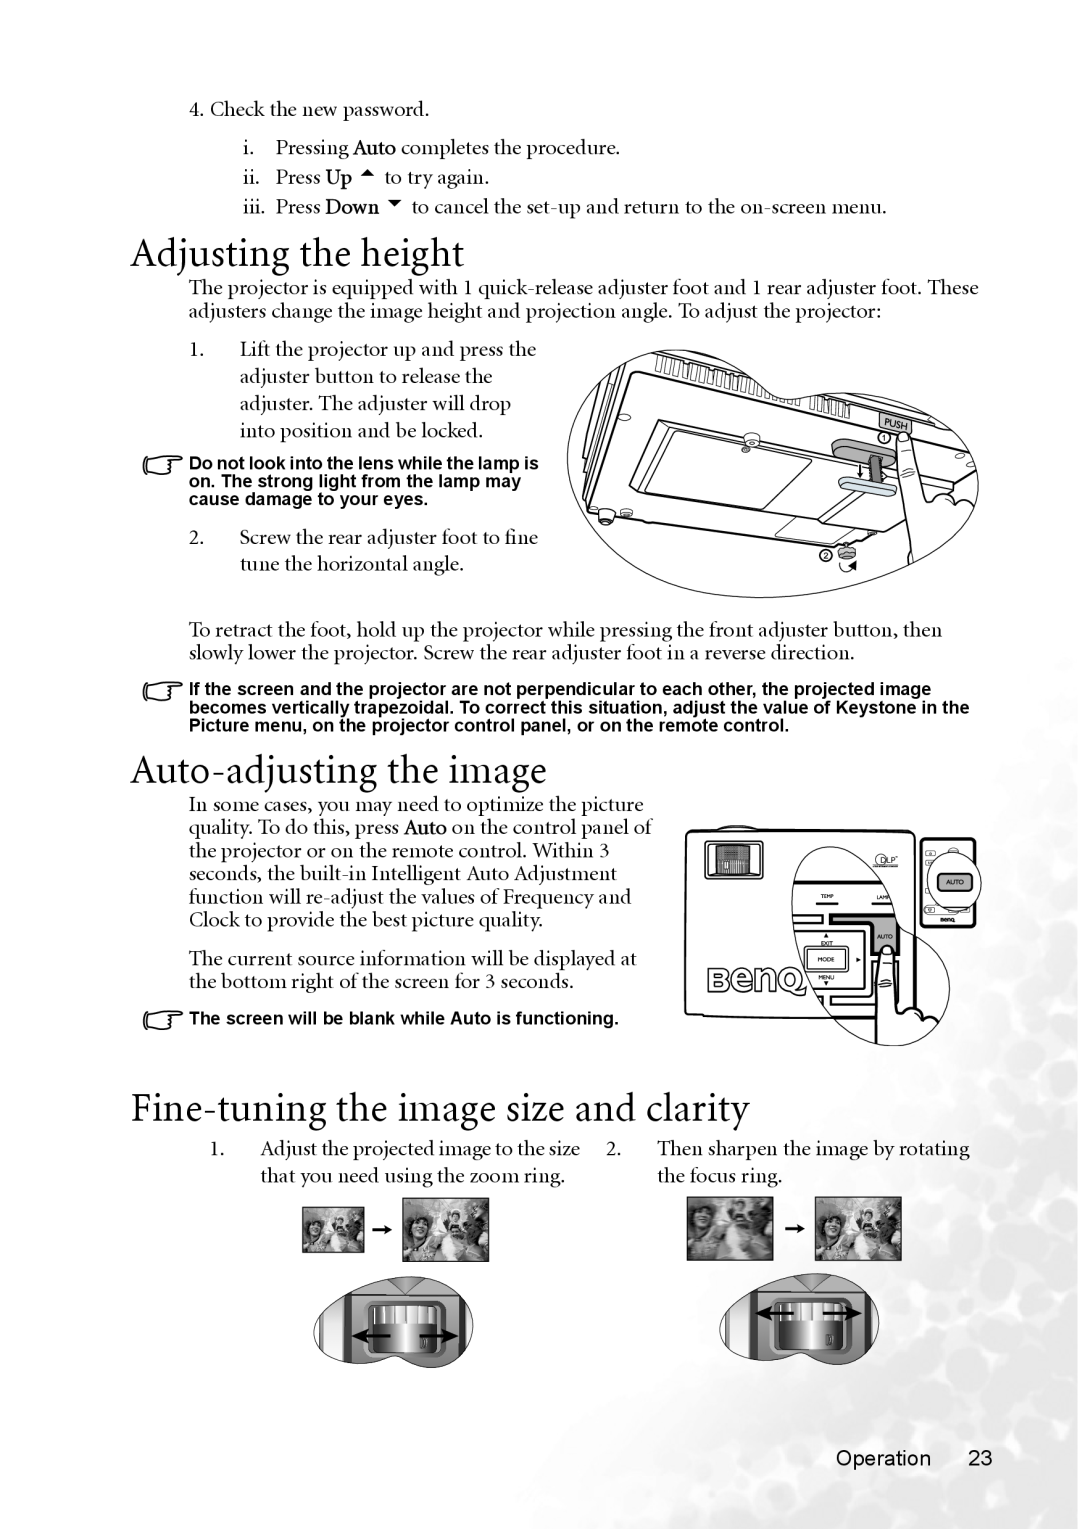 BenQ MP620p user manual Adjusting the height, Auto-adjusting the image, Fine-tuning the image size and clarity 